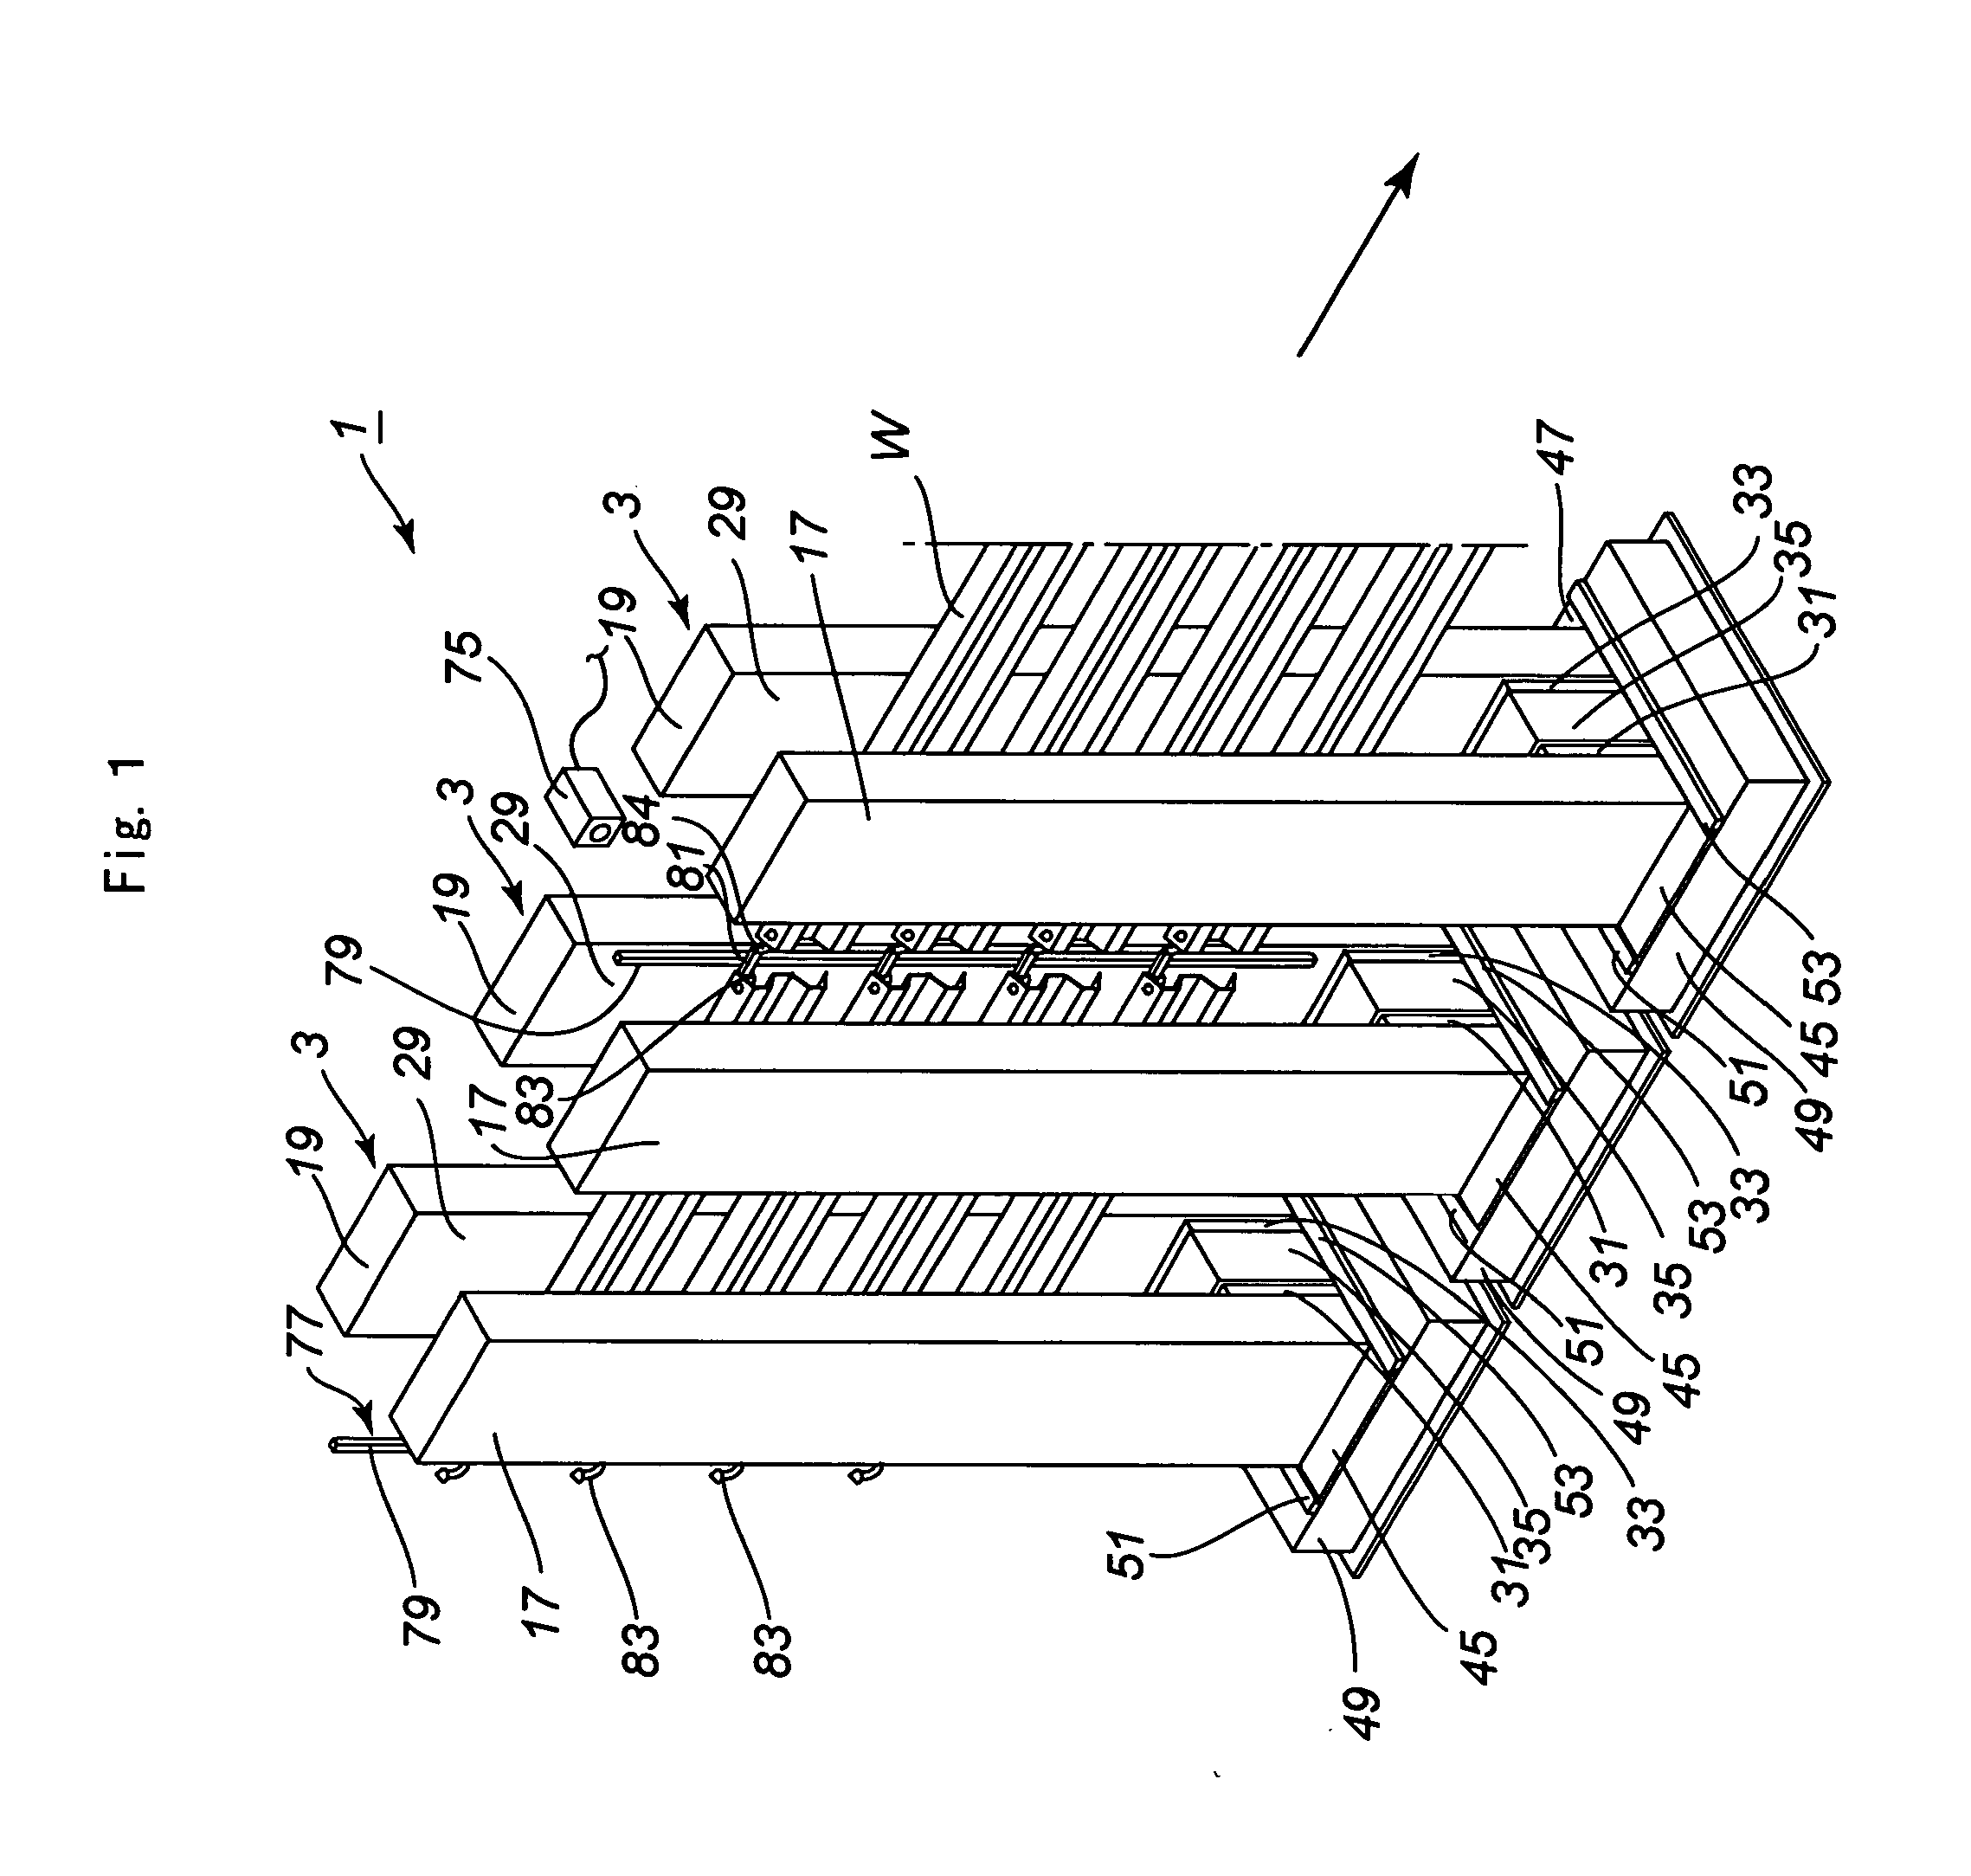 Apparatus and method for heating works